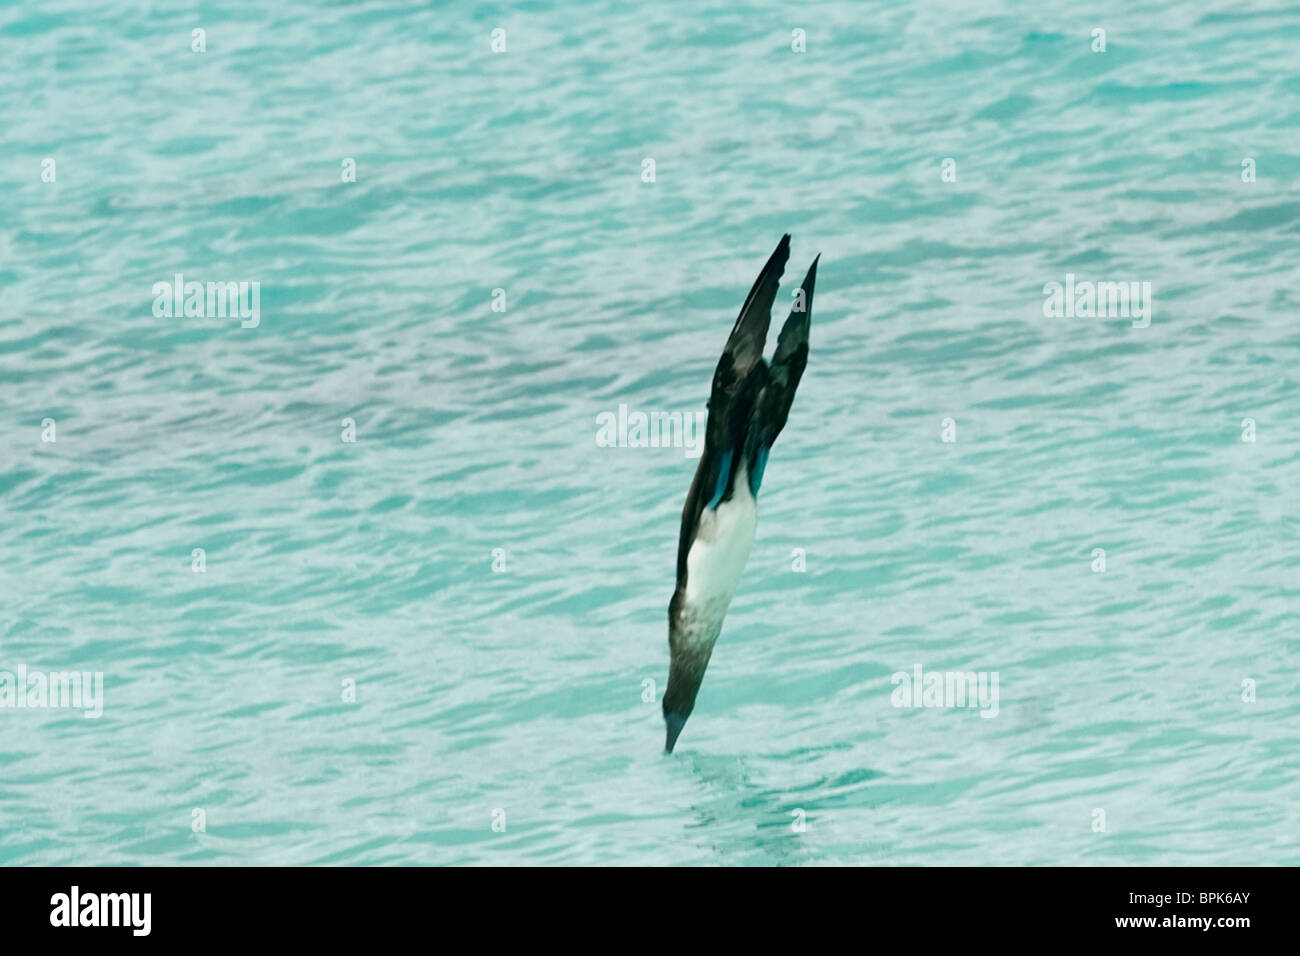 South America, Ecuador, Galapagos Islands, Blue-footed Booby, wings folded, rocket-like, diving for food near Espanola Island Stock Photo